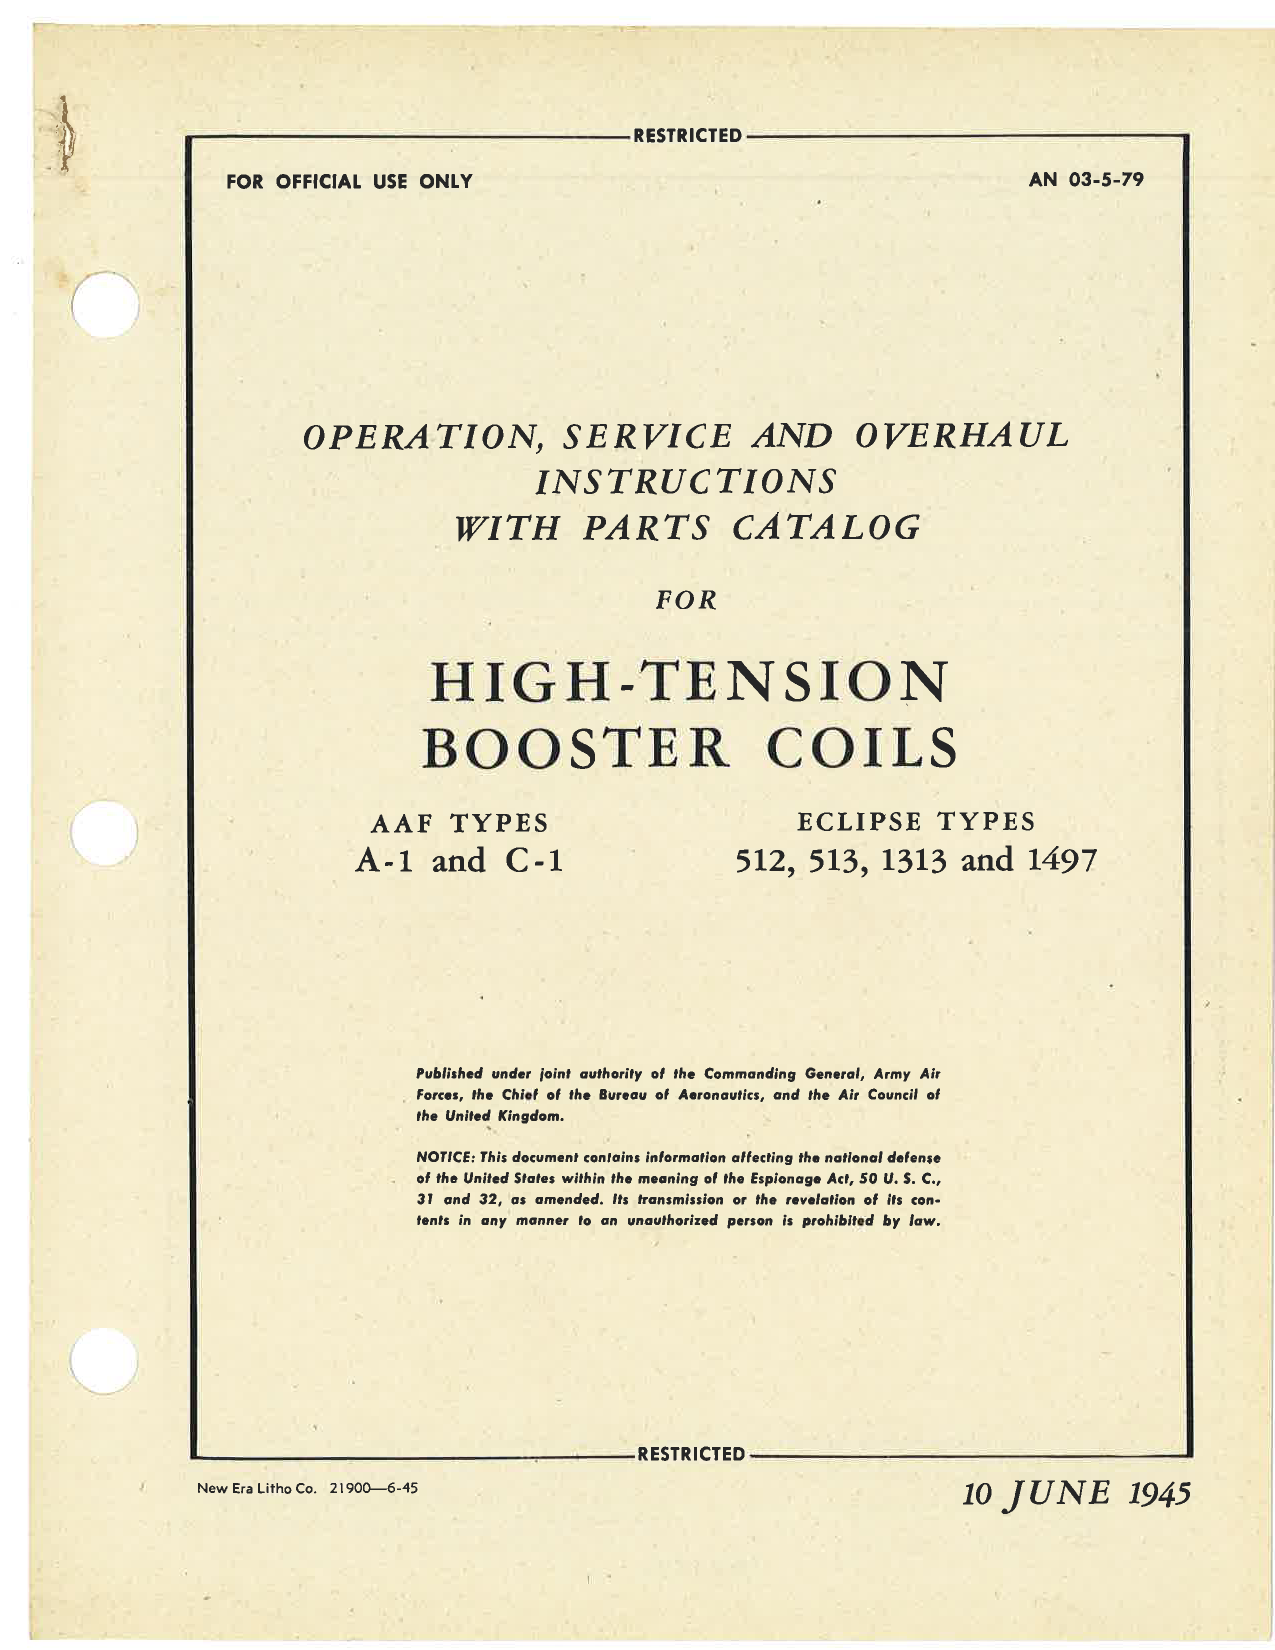 Sample page 1 from AirCorps Library document: Operation, Service & Overhaul Instructions with Parts Catalog for High Tension Booster Coils